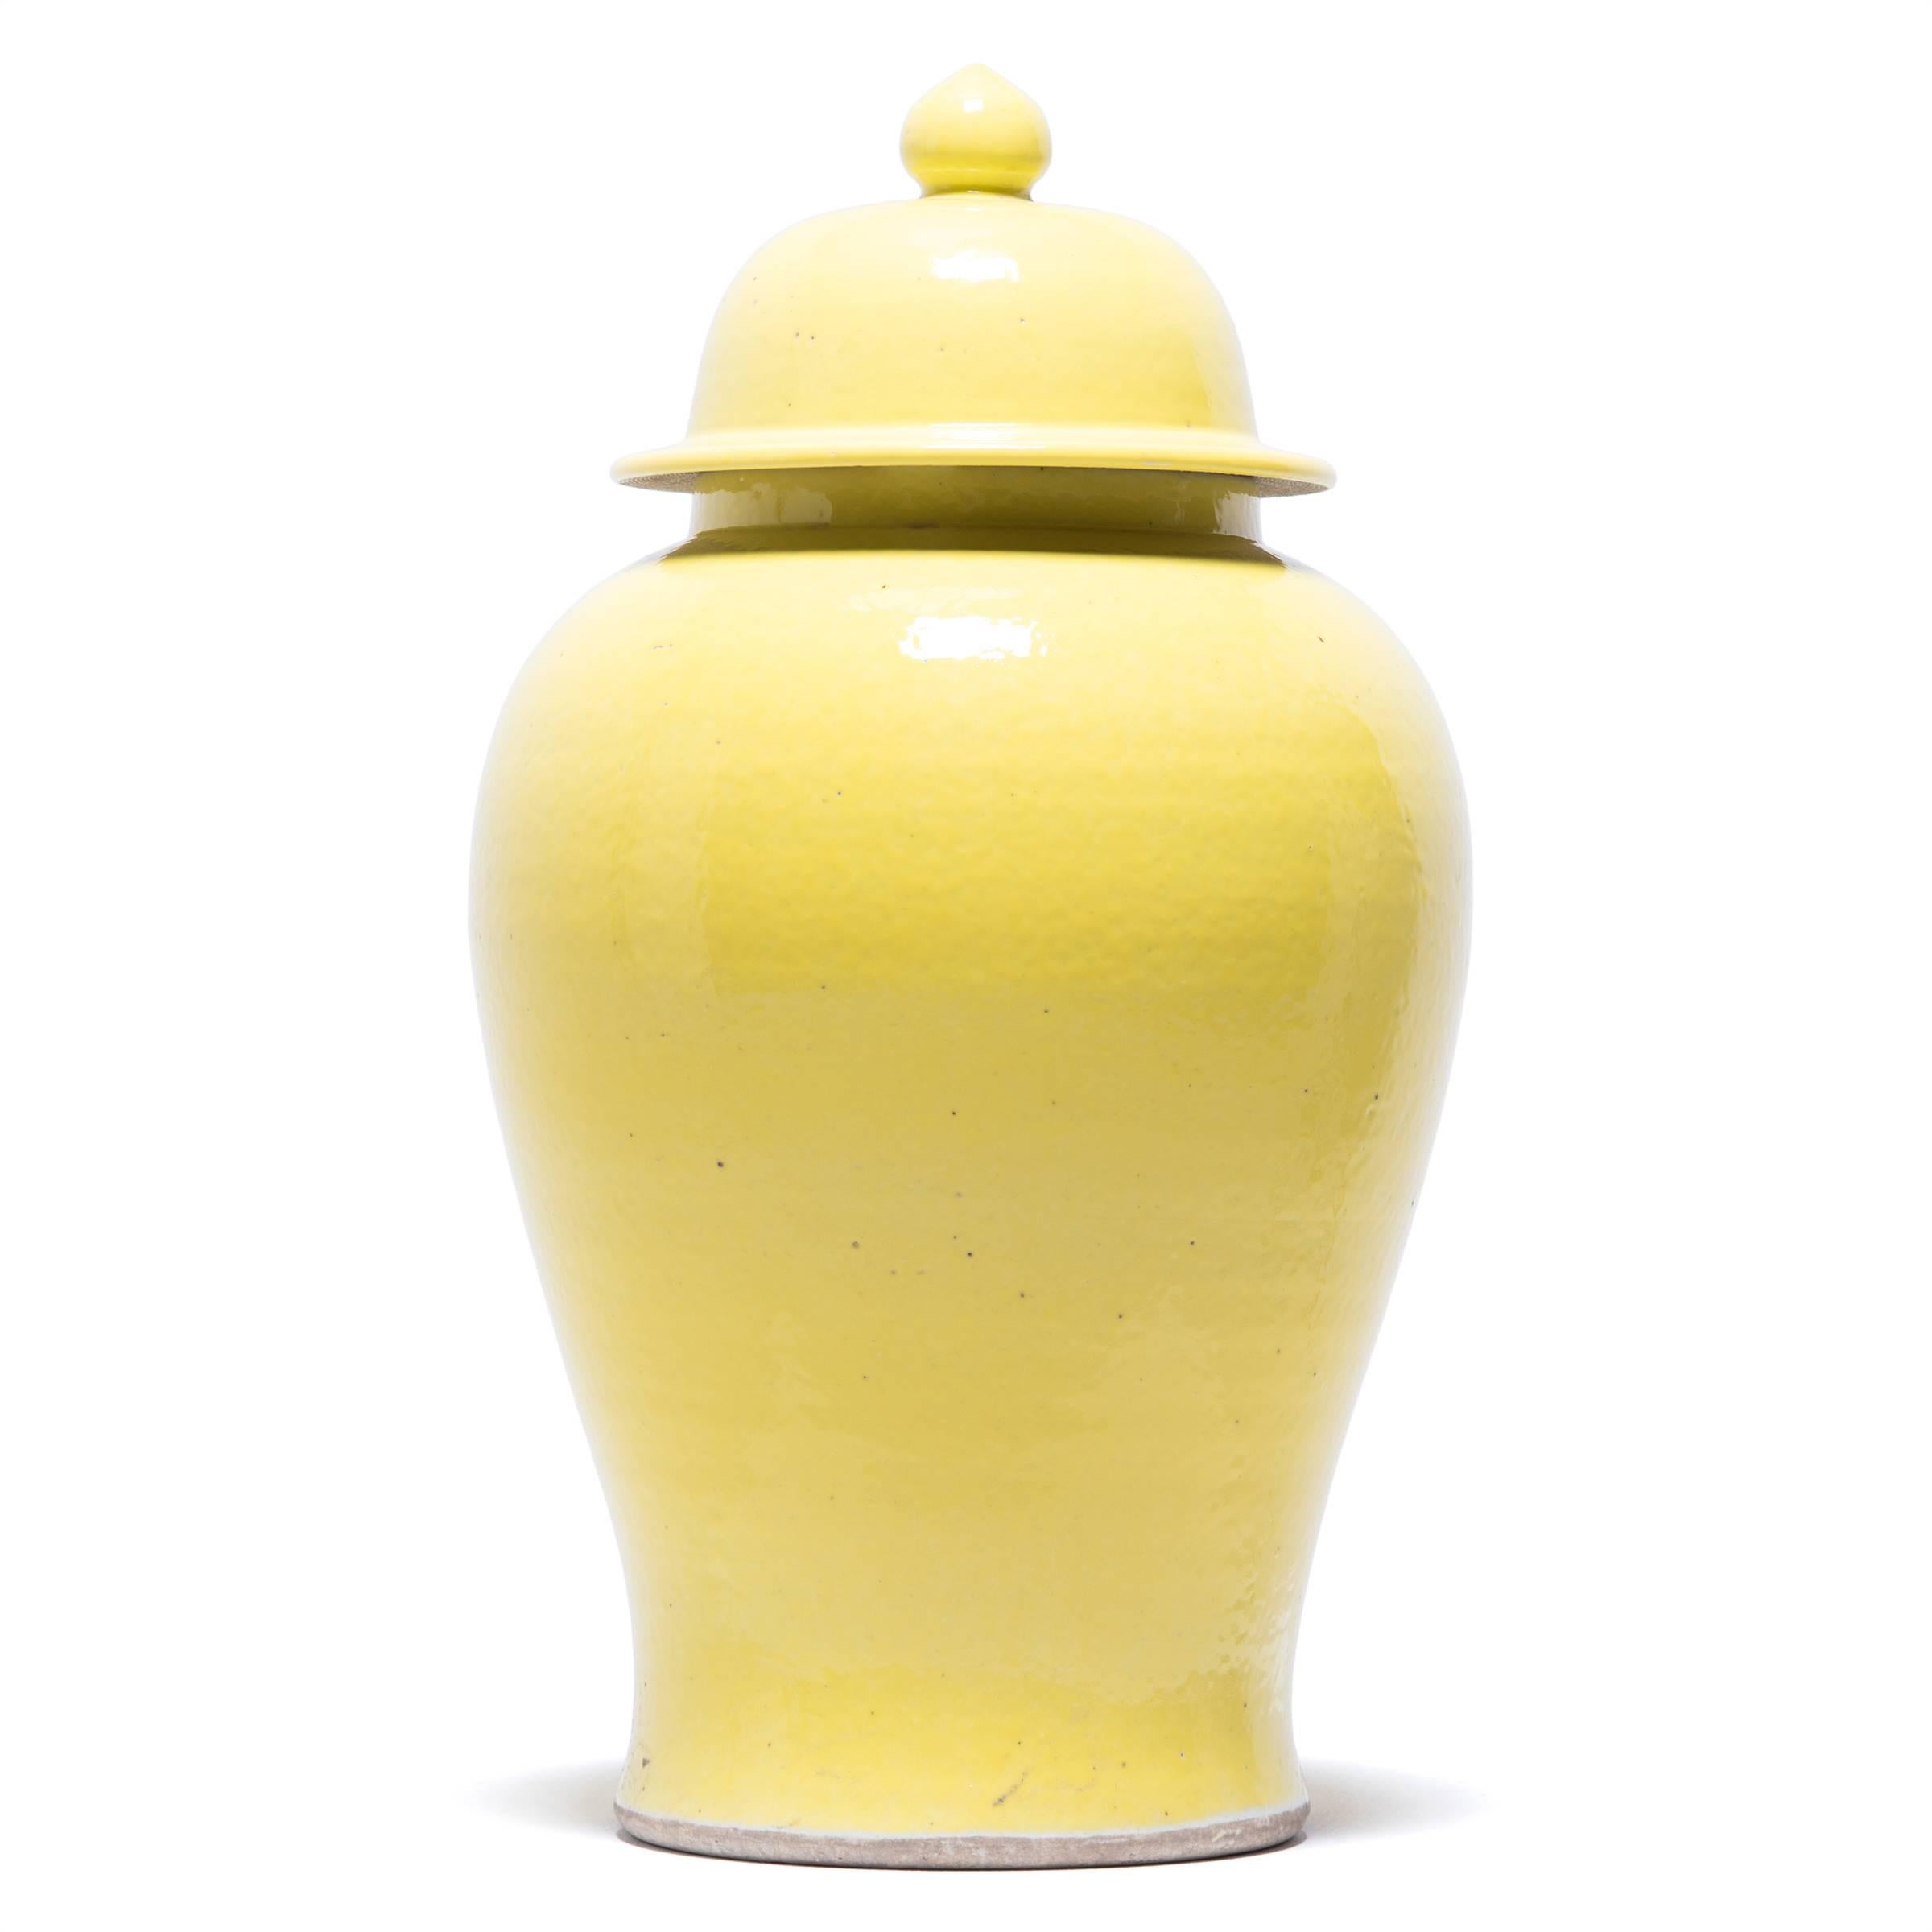 Defined by its rounded body, high shoulders and domed lid, the time-honoured look of the Chinese baluster jar is streamlined as a monochrome. This artisan made modern take on a Classic is cloaked in a simple, cheerful citron glaze to call out its